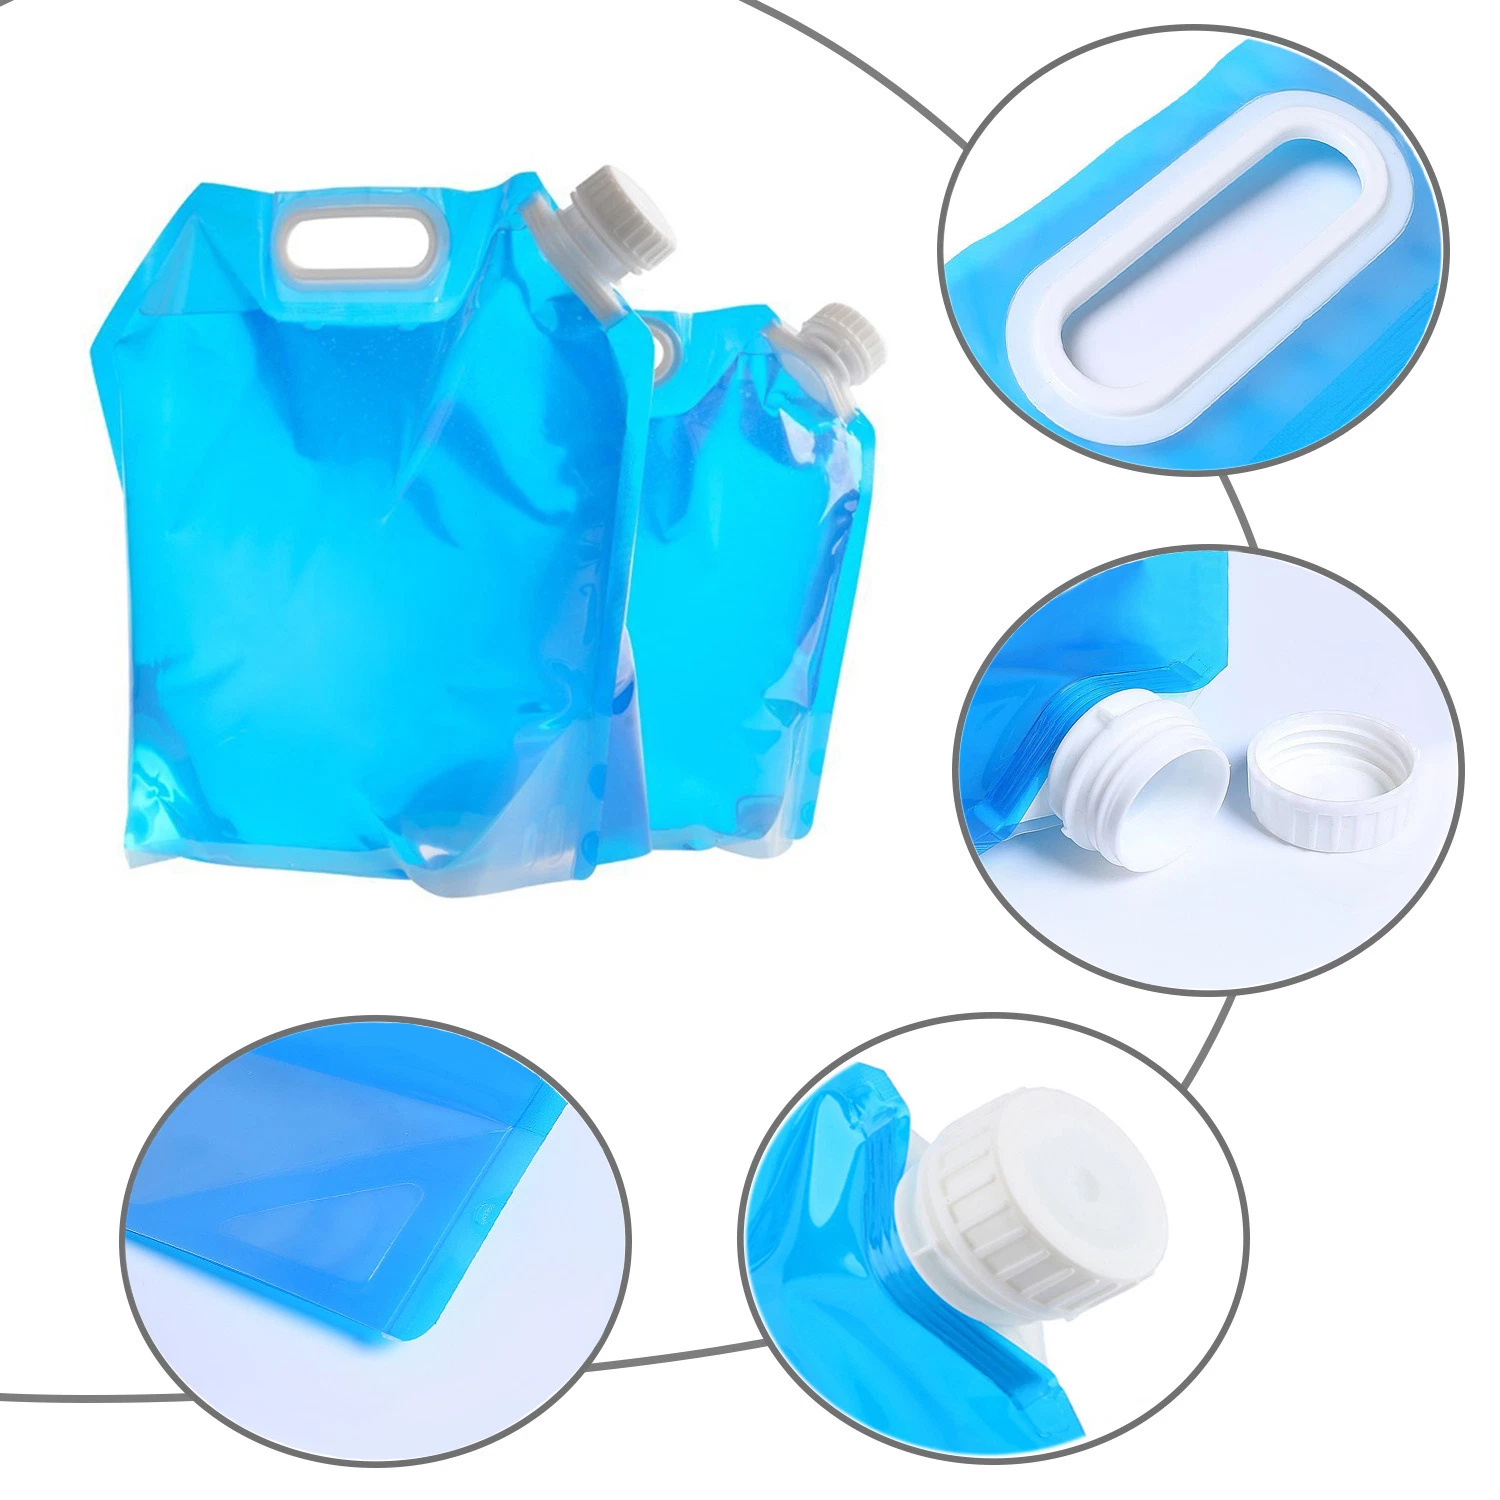 5 Liter Collapsible Water Bag Portable Folding Emergency Water Storage with Carrier Camping Hiking Travel (Available in with or without Faucet) Wyz13170